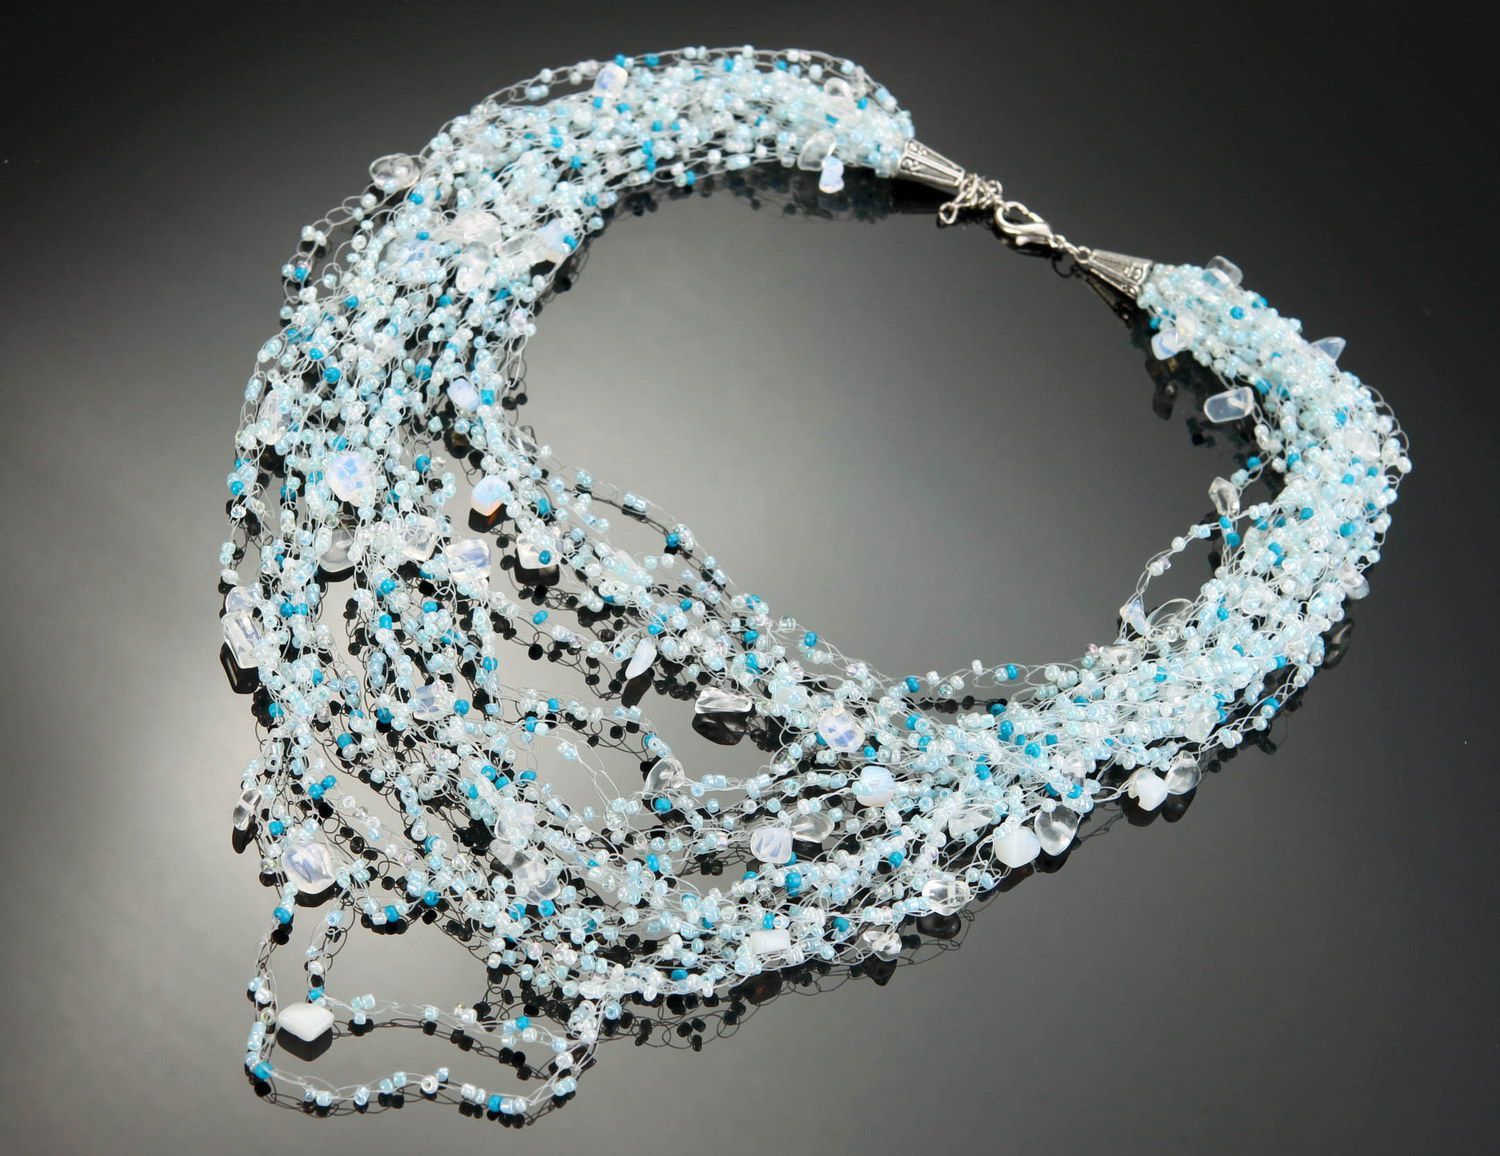 Necklace made of opal fragments photo 1